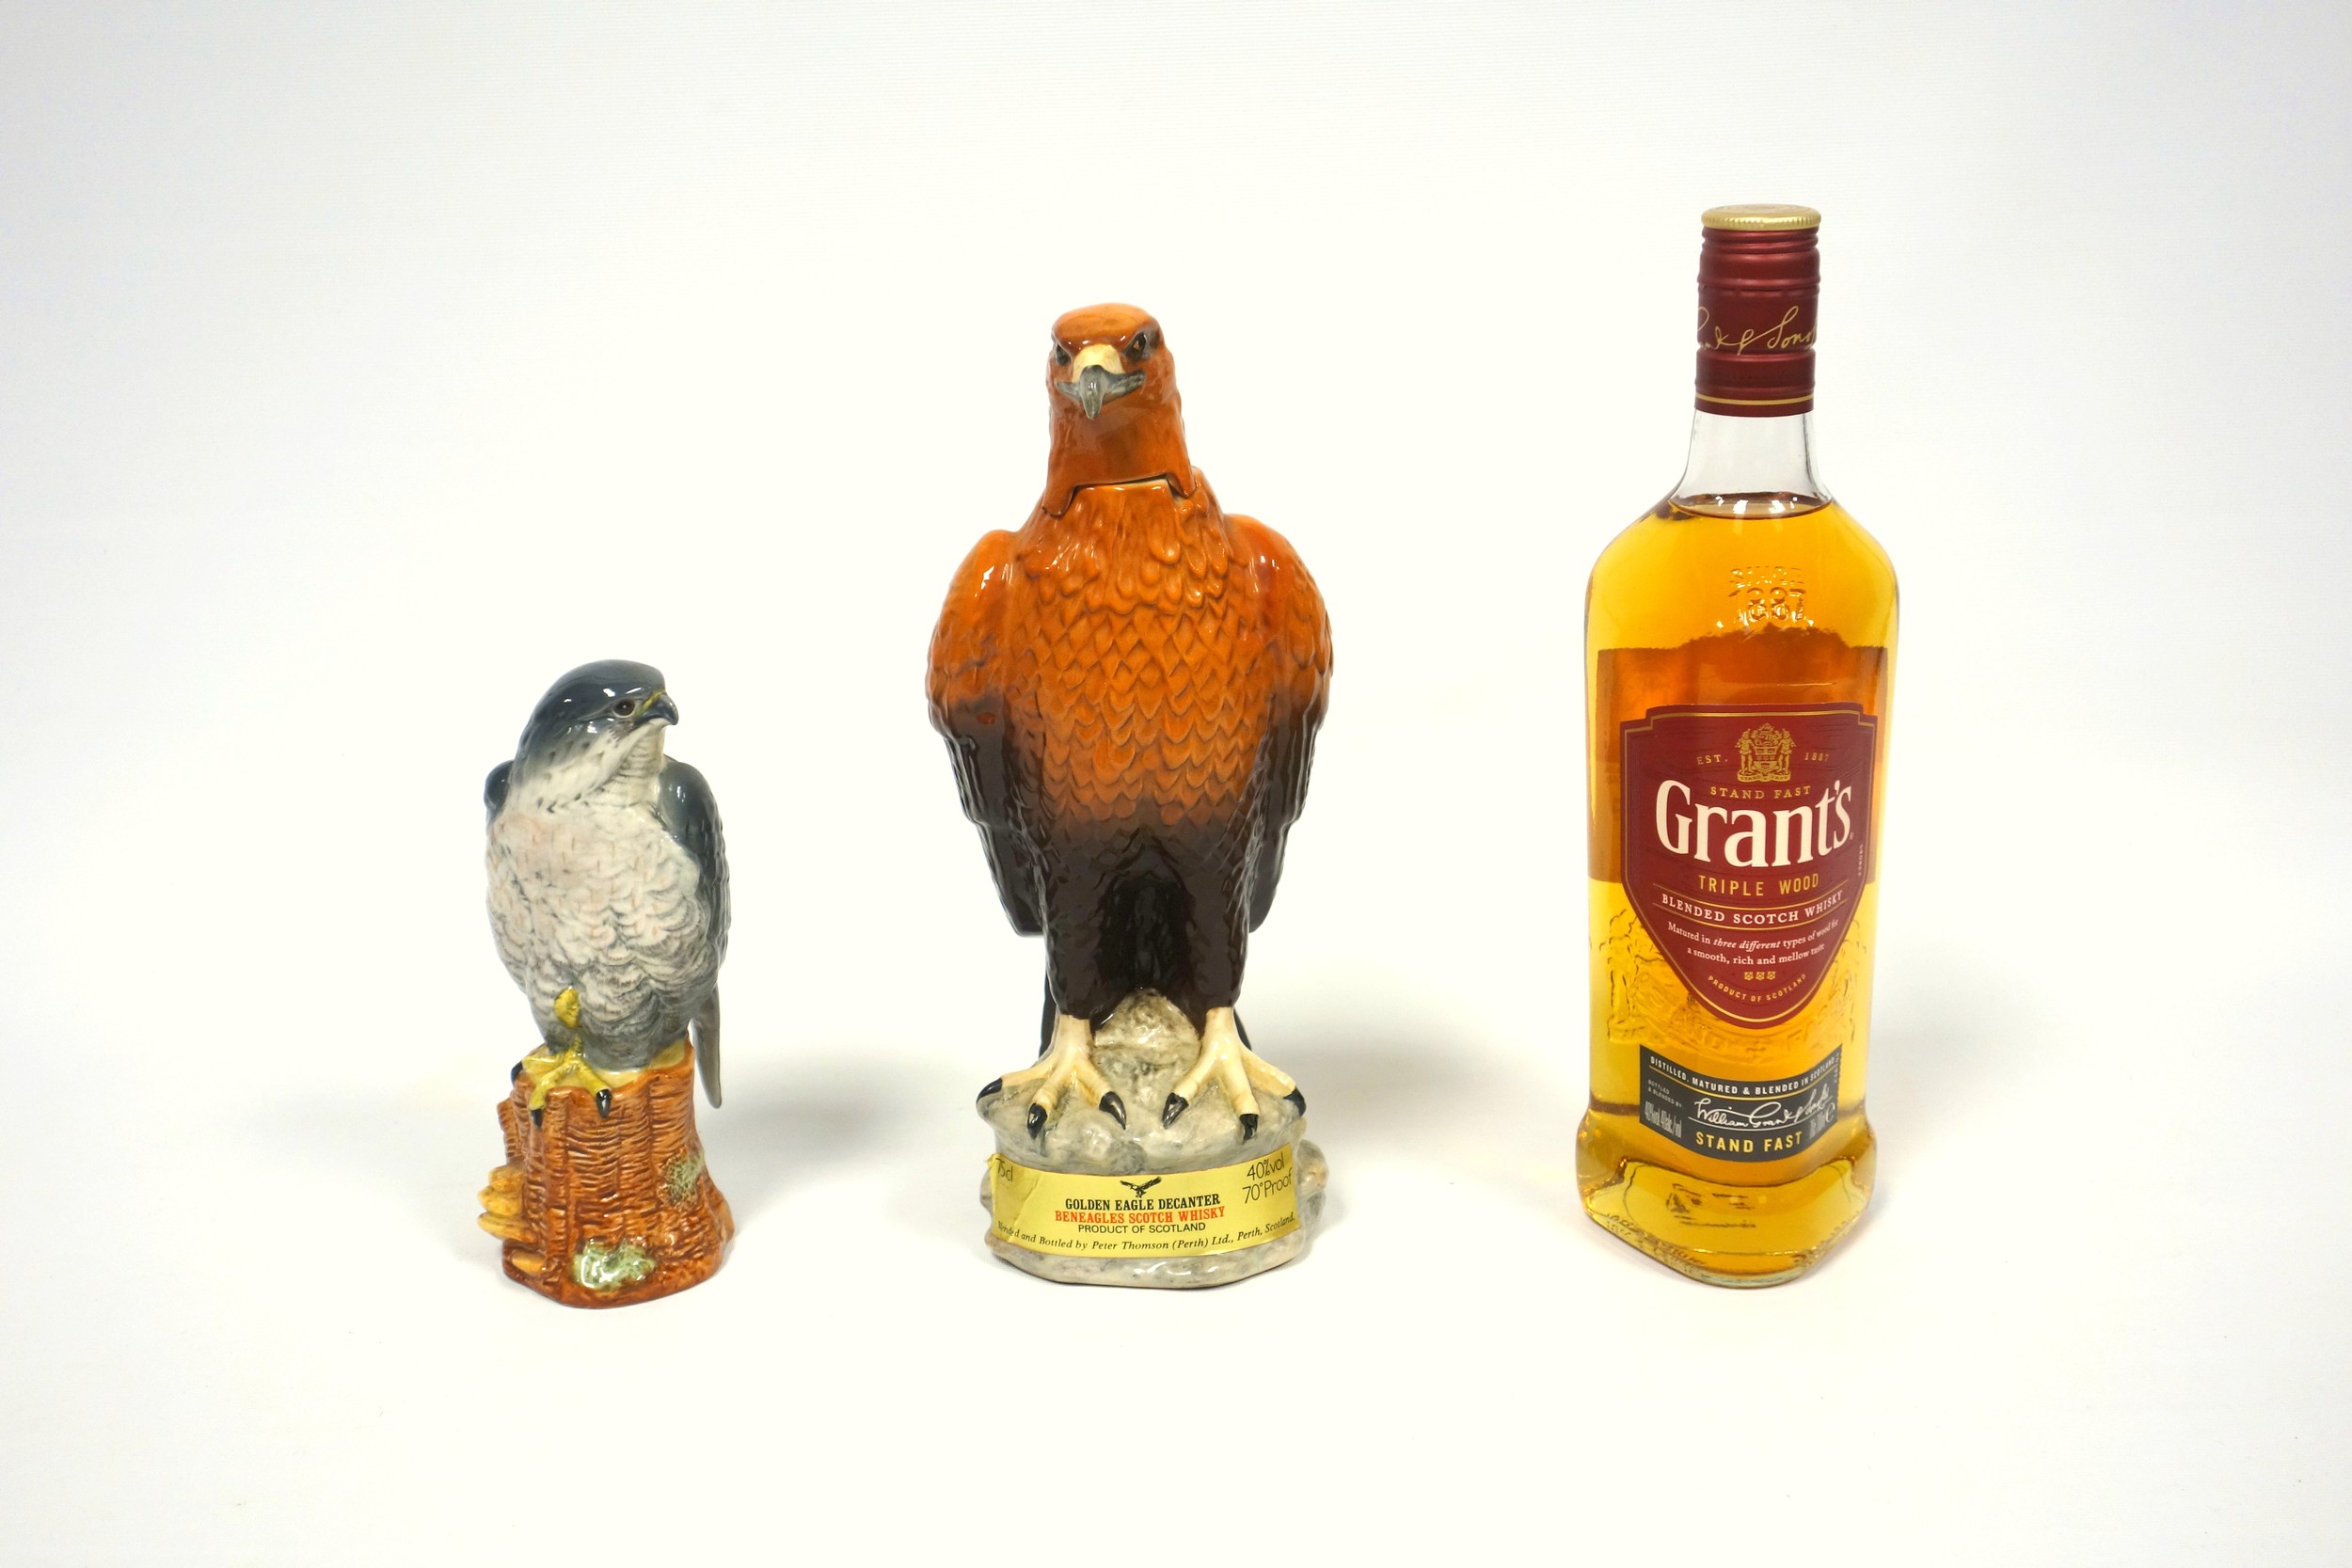 2 Beswick Beneagles scotch whisky ceramic decanters, "Golden Eagle", 75cl, with detachable head,